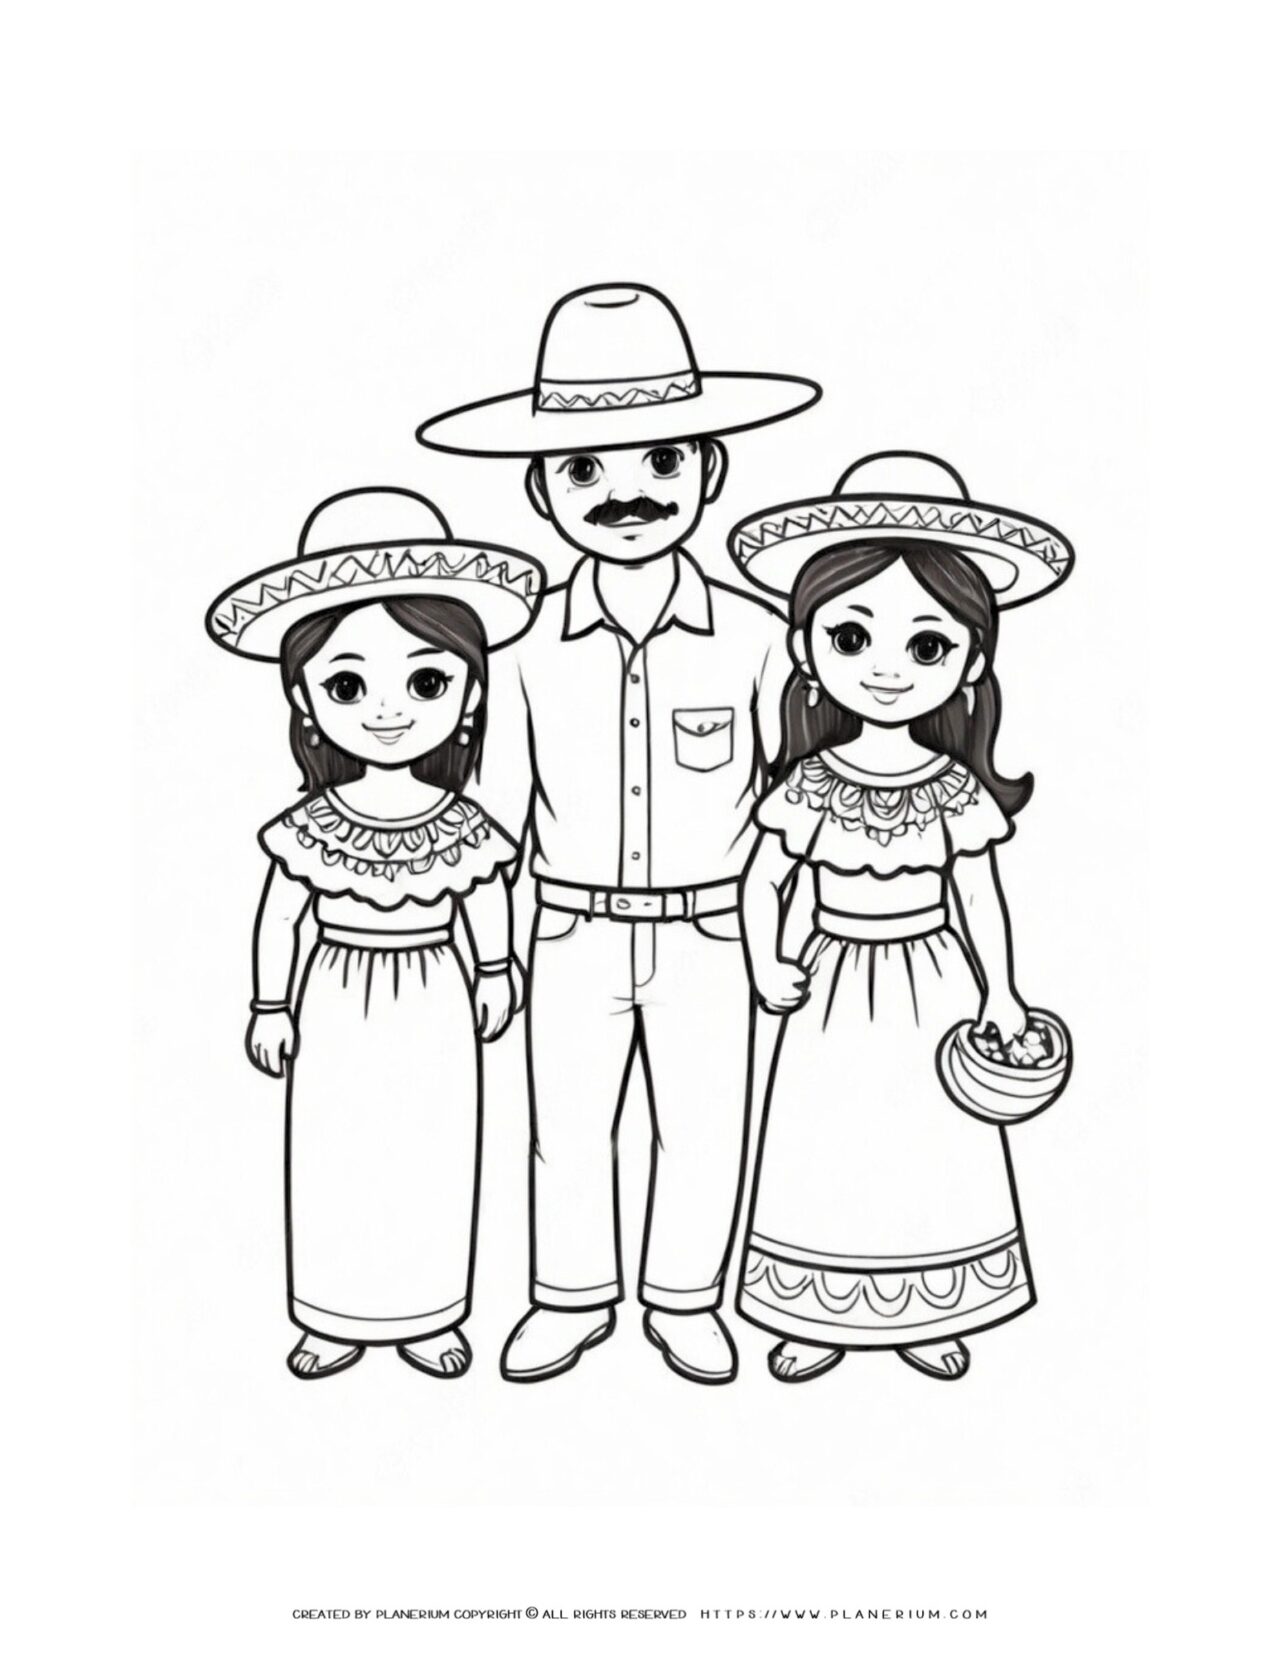 mexican-family-father-and-two-daughters-coloring-page-for-kids